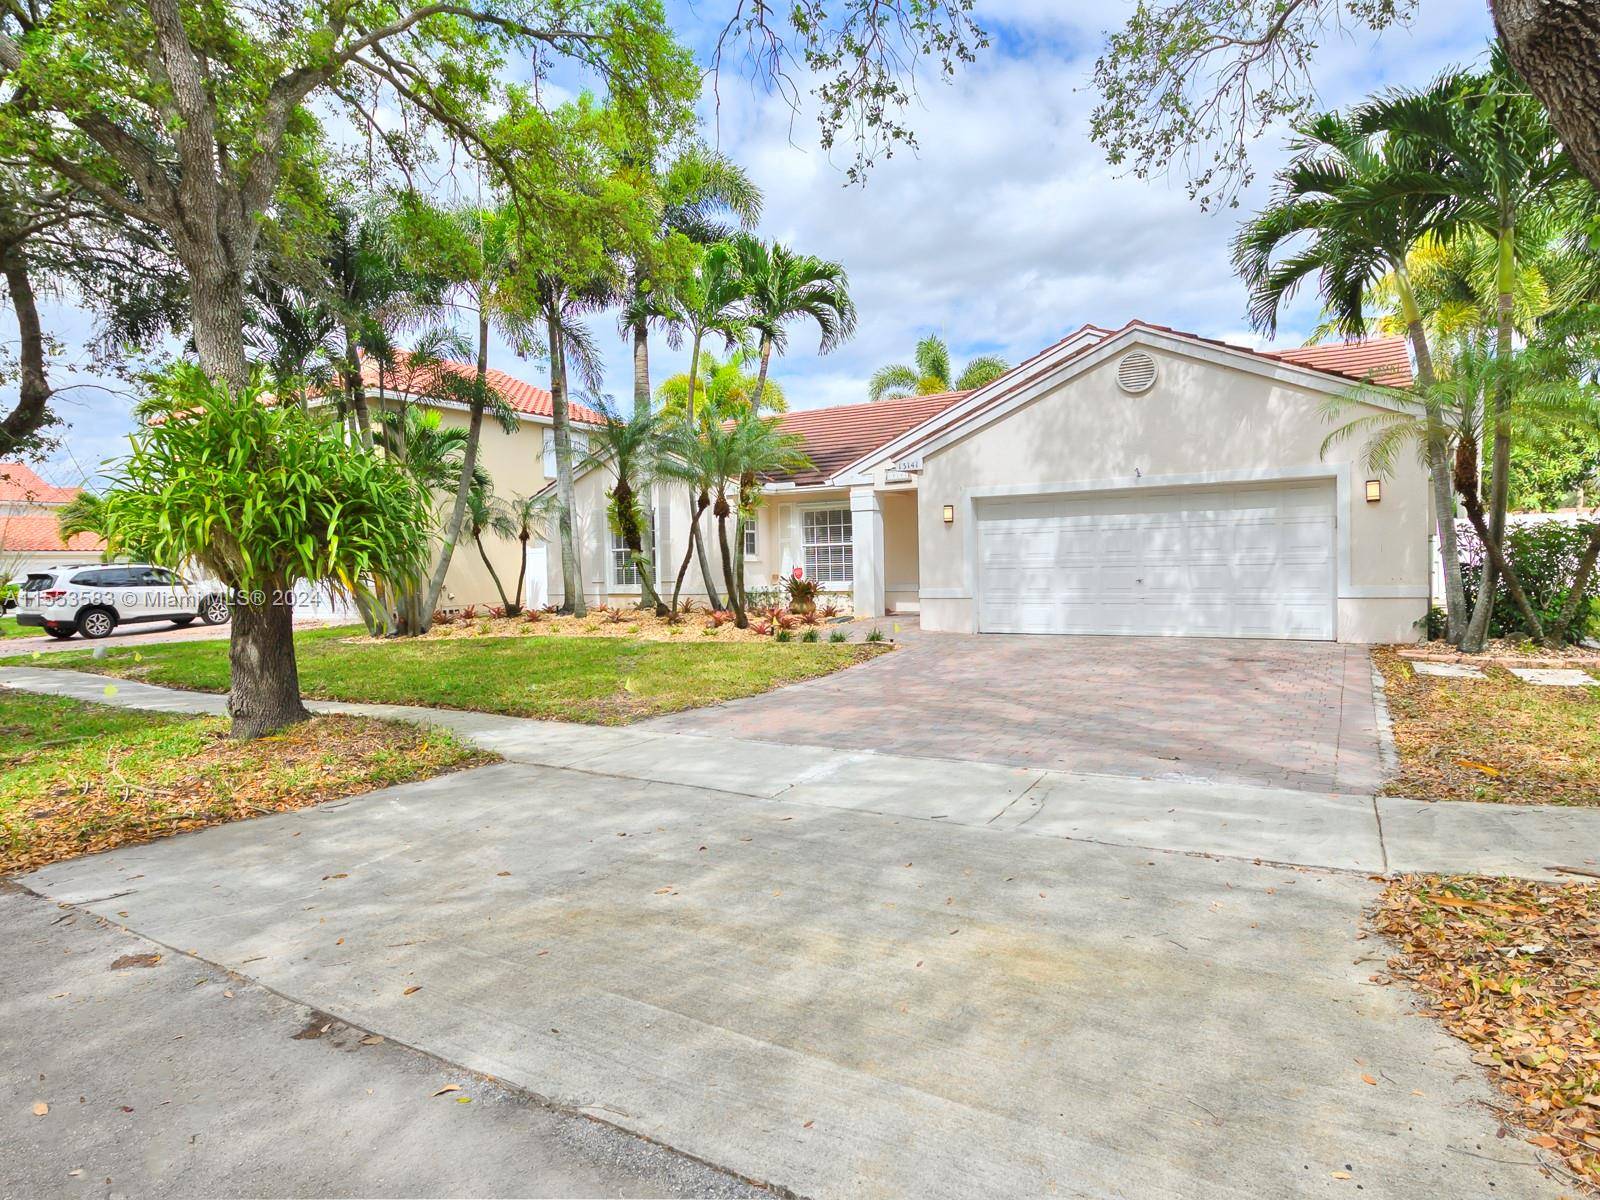 Lake front 3b 2b renovated Miramar single family home with.